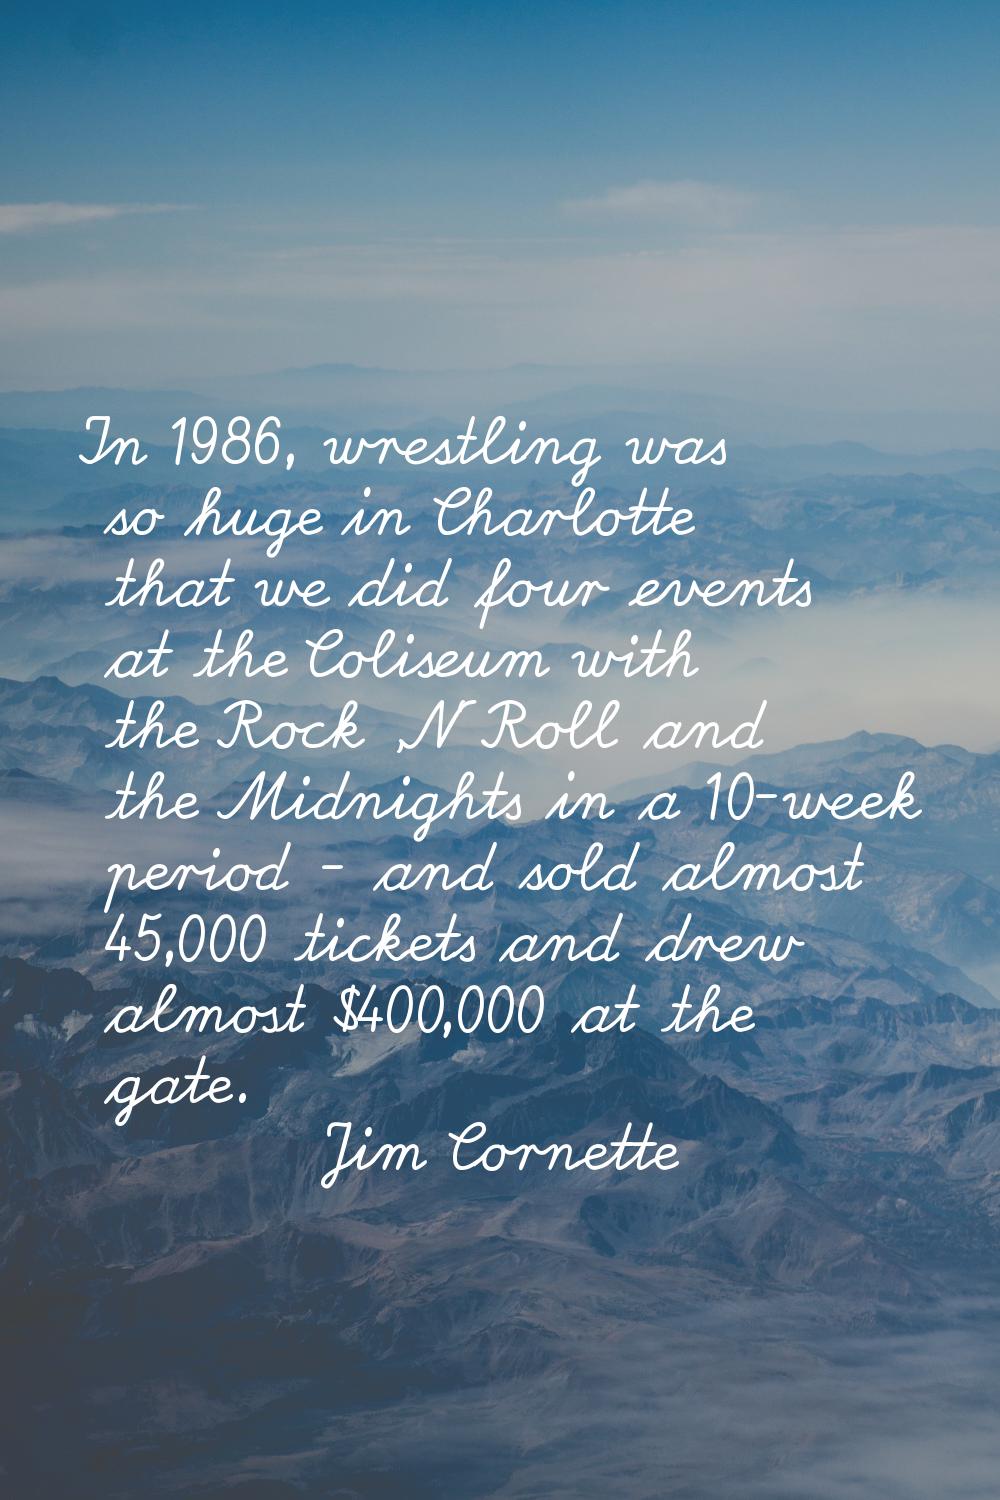 In 1986, wrestling was so huge in Charlotte that we did four events at the Coliseum with the Rock '